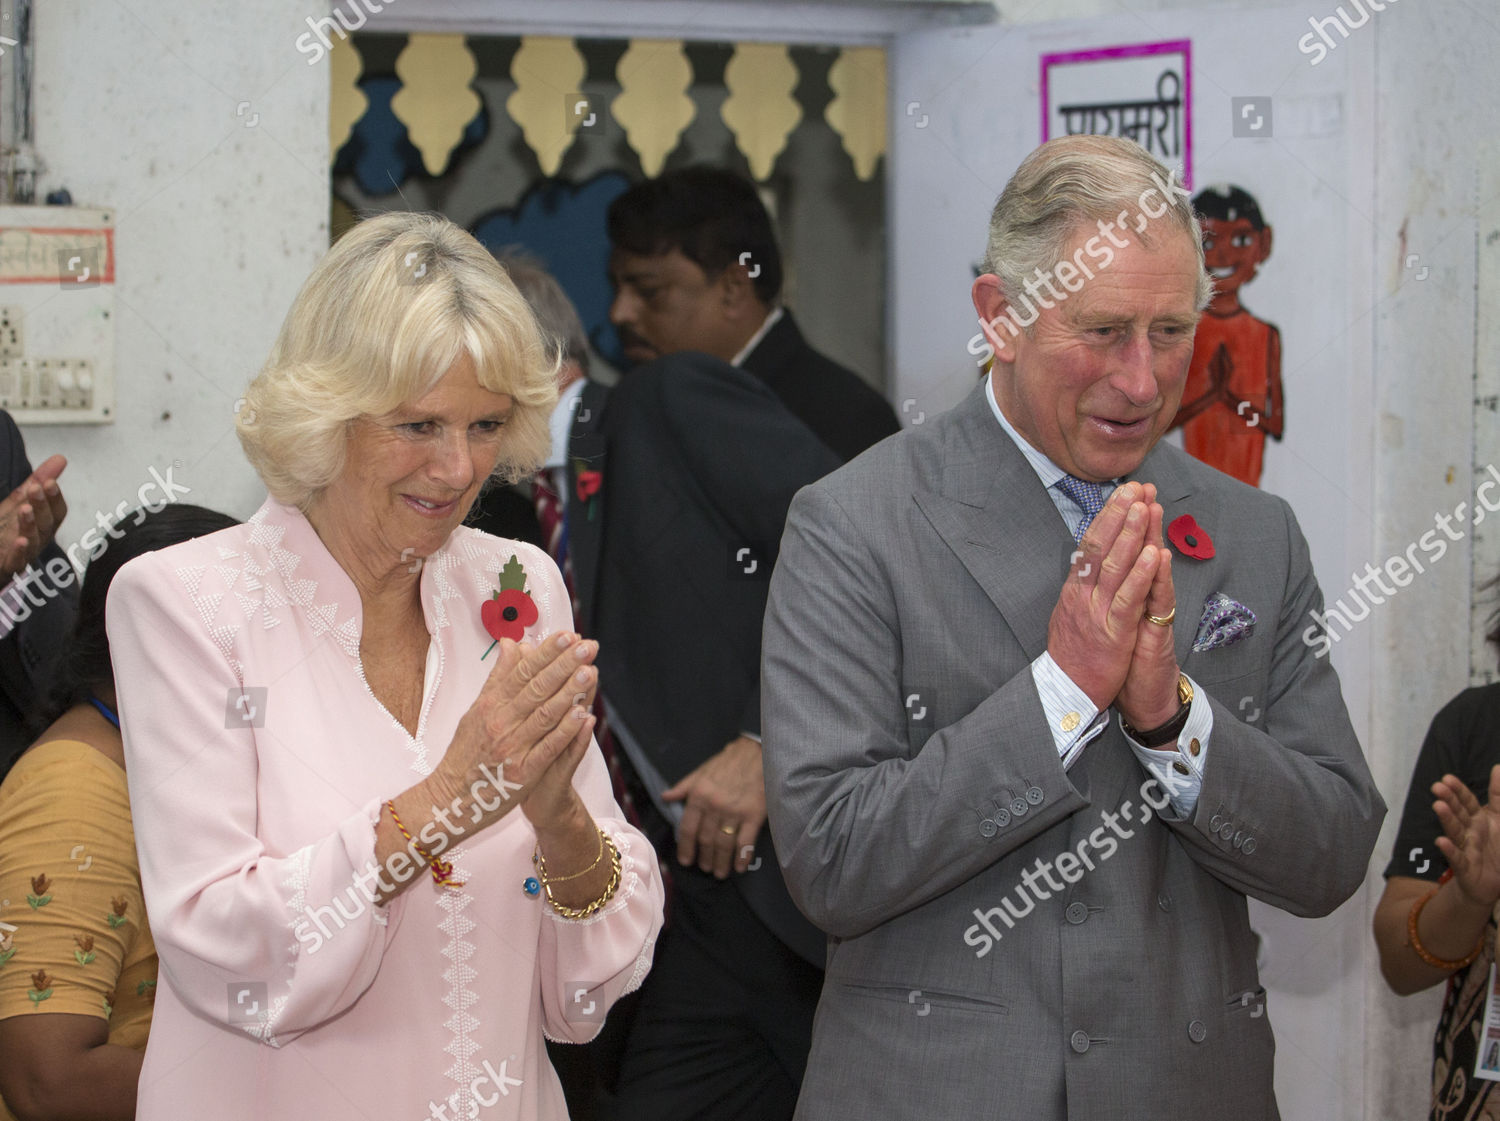 prince-charles-and-camilla-duchess-of-cornwall-in-mumbai-india-shutterstock-editorial-3353545a.jpg